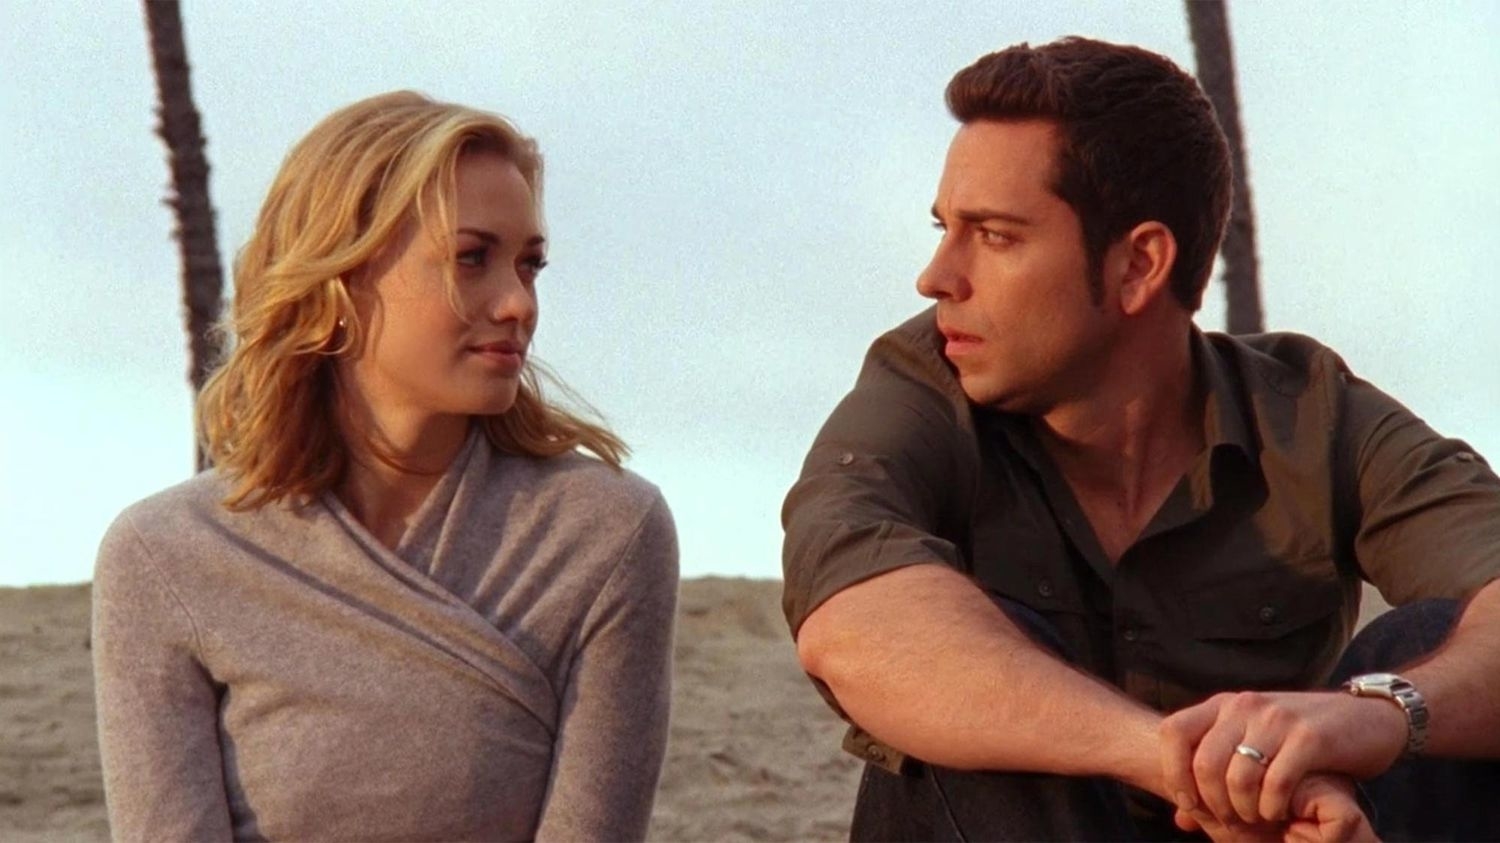 Two characters from a scene with a beach backdrop, sitting side by side, appear to be in conversation